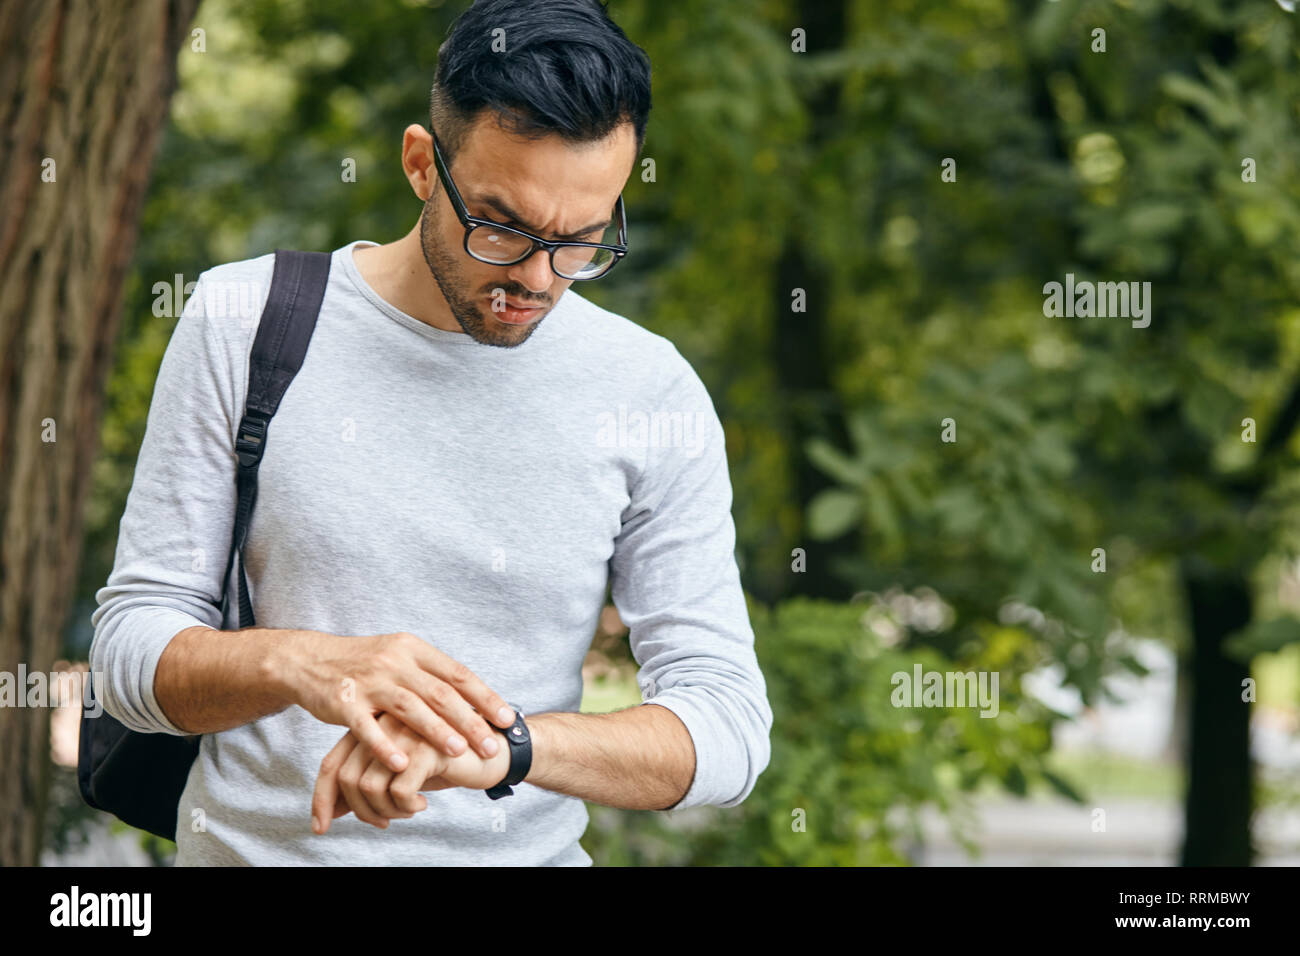 Portrait of smart responsible man with modern hairdo looking at watch on wrist over blurred park background hurry up for meeting. Management employmen Stock Photo